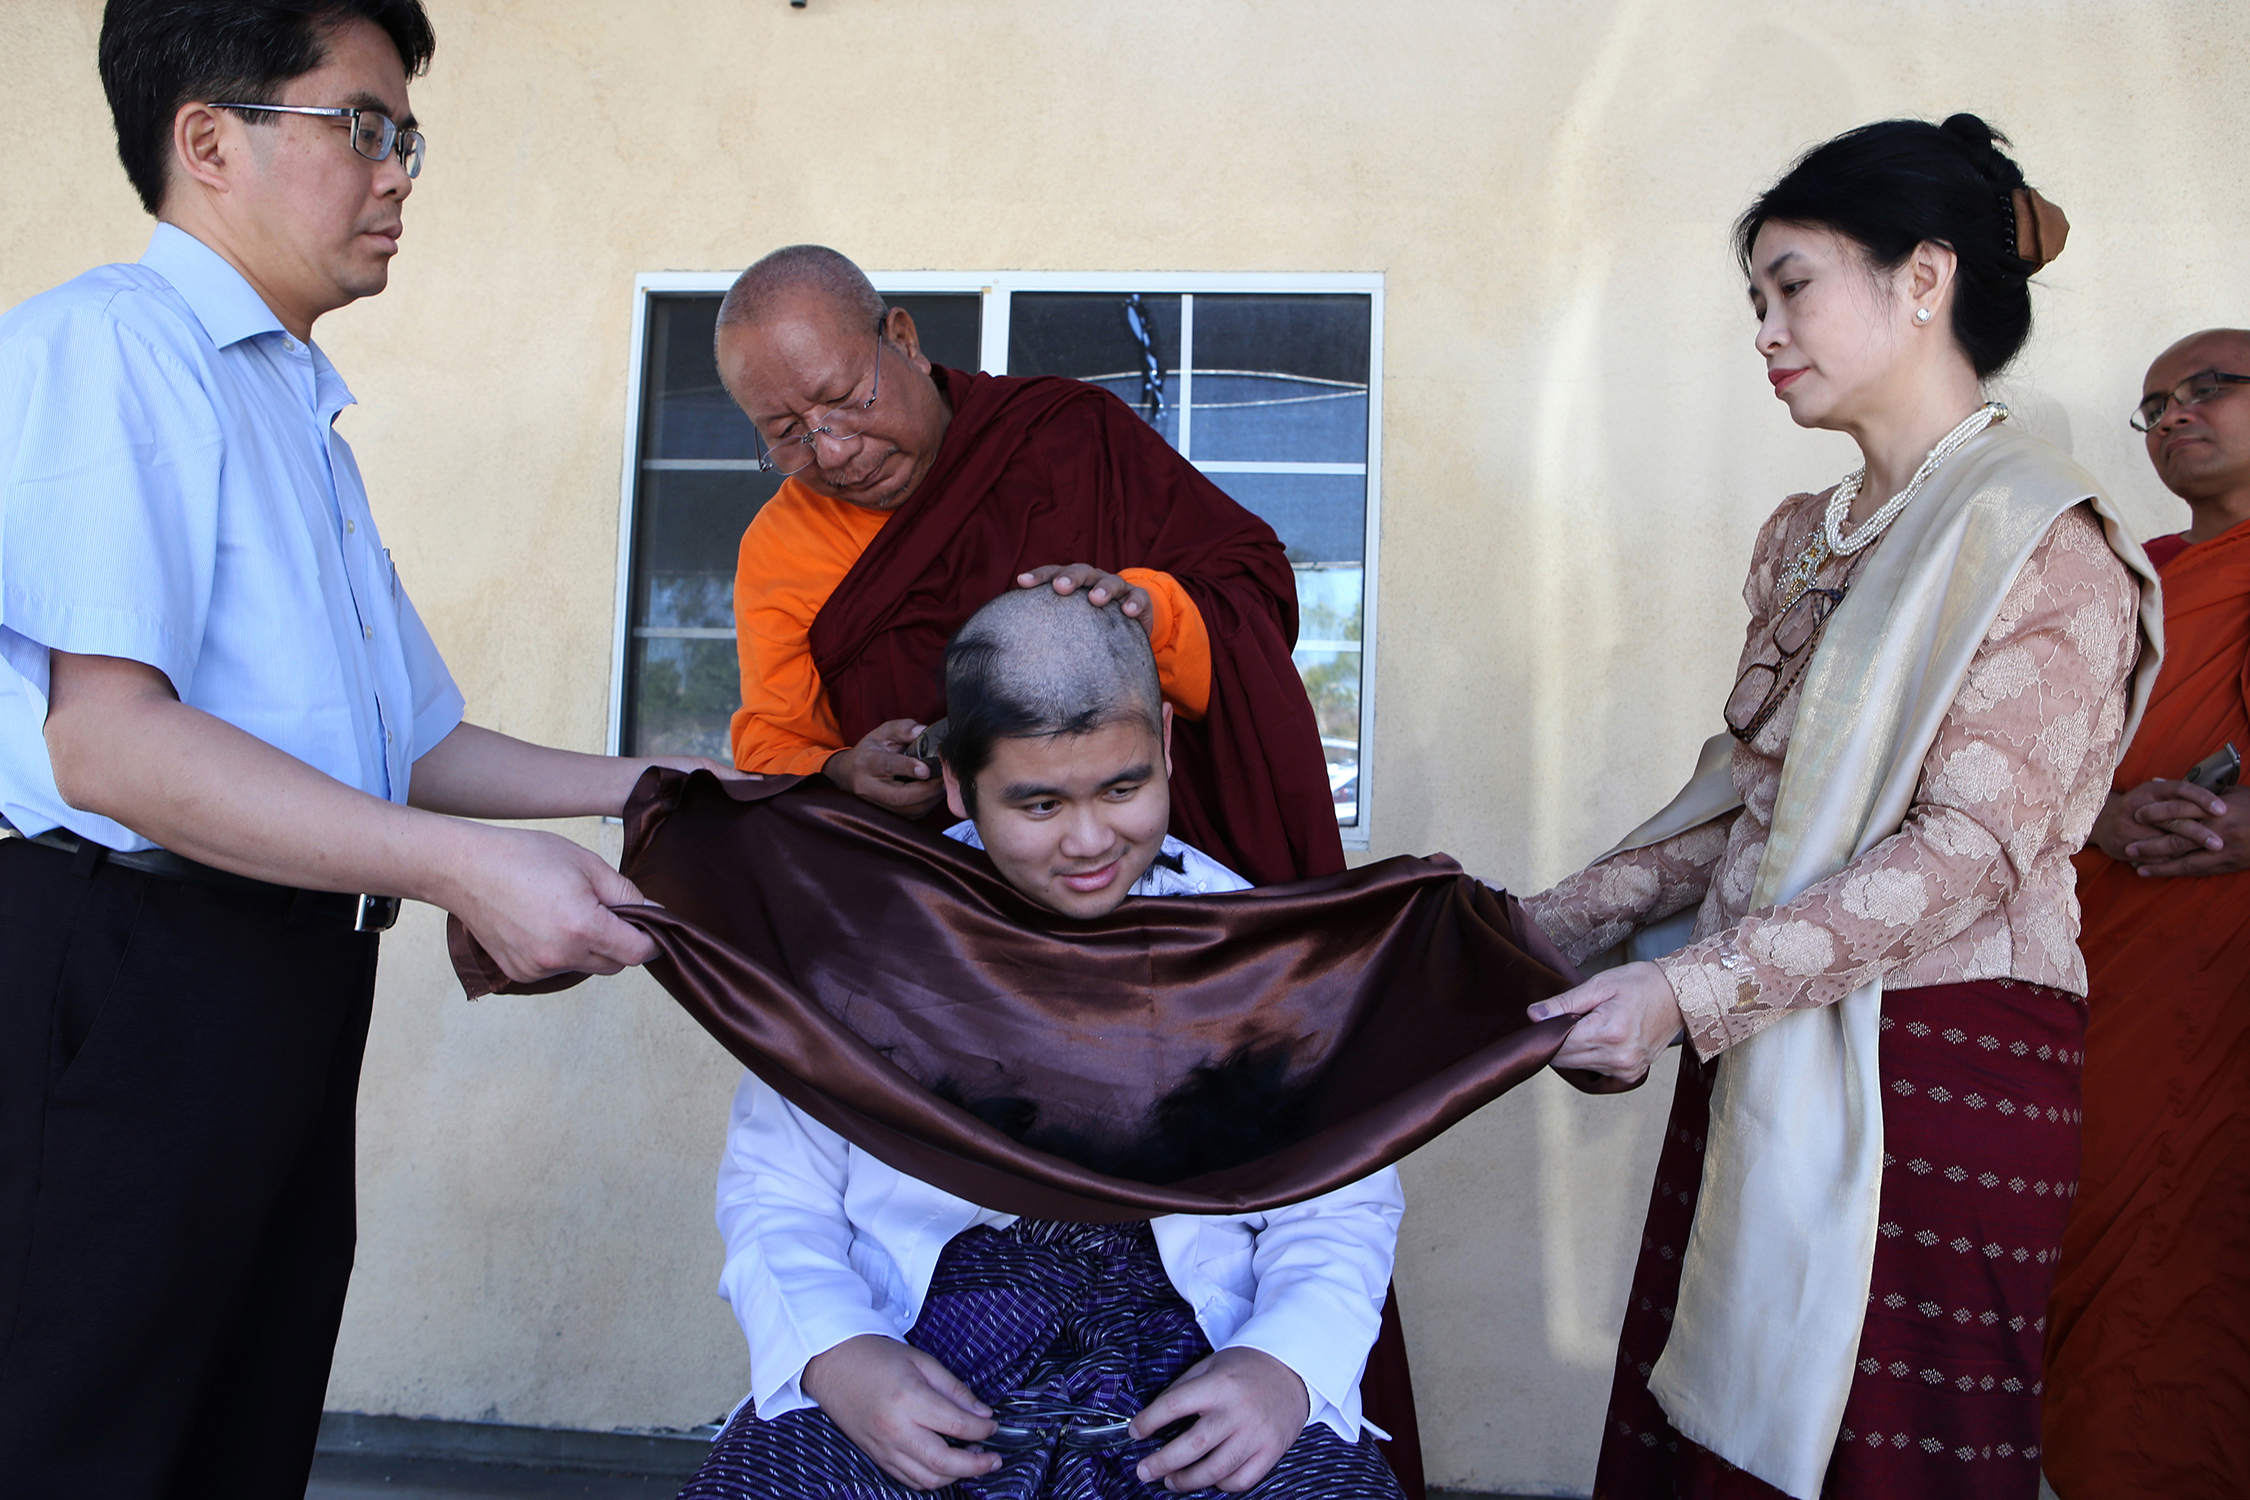  USC student Robert Win Maw Min, 20, recently checked in for a three day stay at the Dhammajoti Meditation Center in Baldwin Park. His head is shaven by Ashin U Uttama as part of the experience. Flanking the young man are his parents, Dr. Tin A Than,